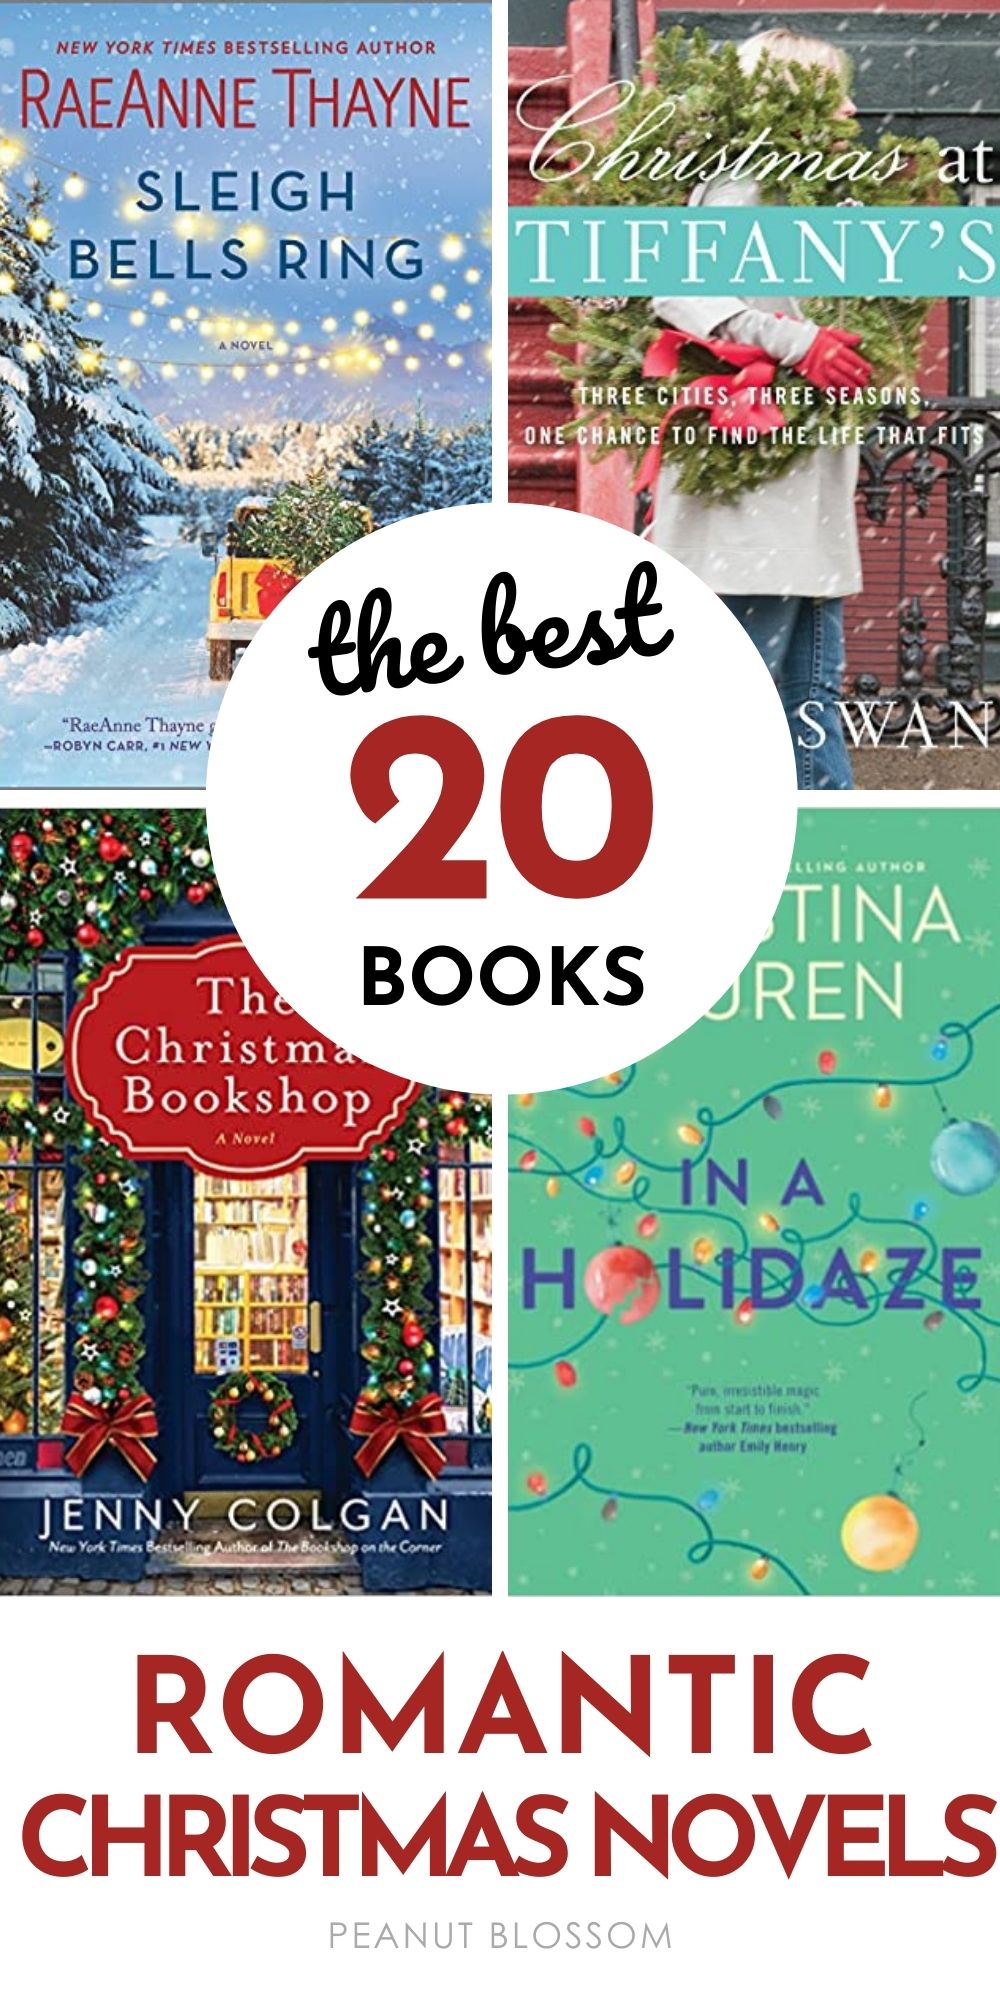 Collage of four books with the text The Best 20 books, Romantic Christmas Novels: Sleigh Bells Ring, Christmas at Tiffany's, The Christmas Bookshop, and In a Holidaze.